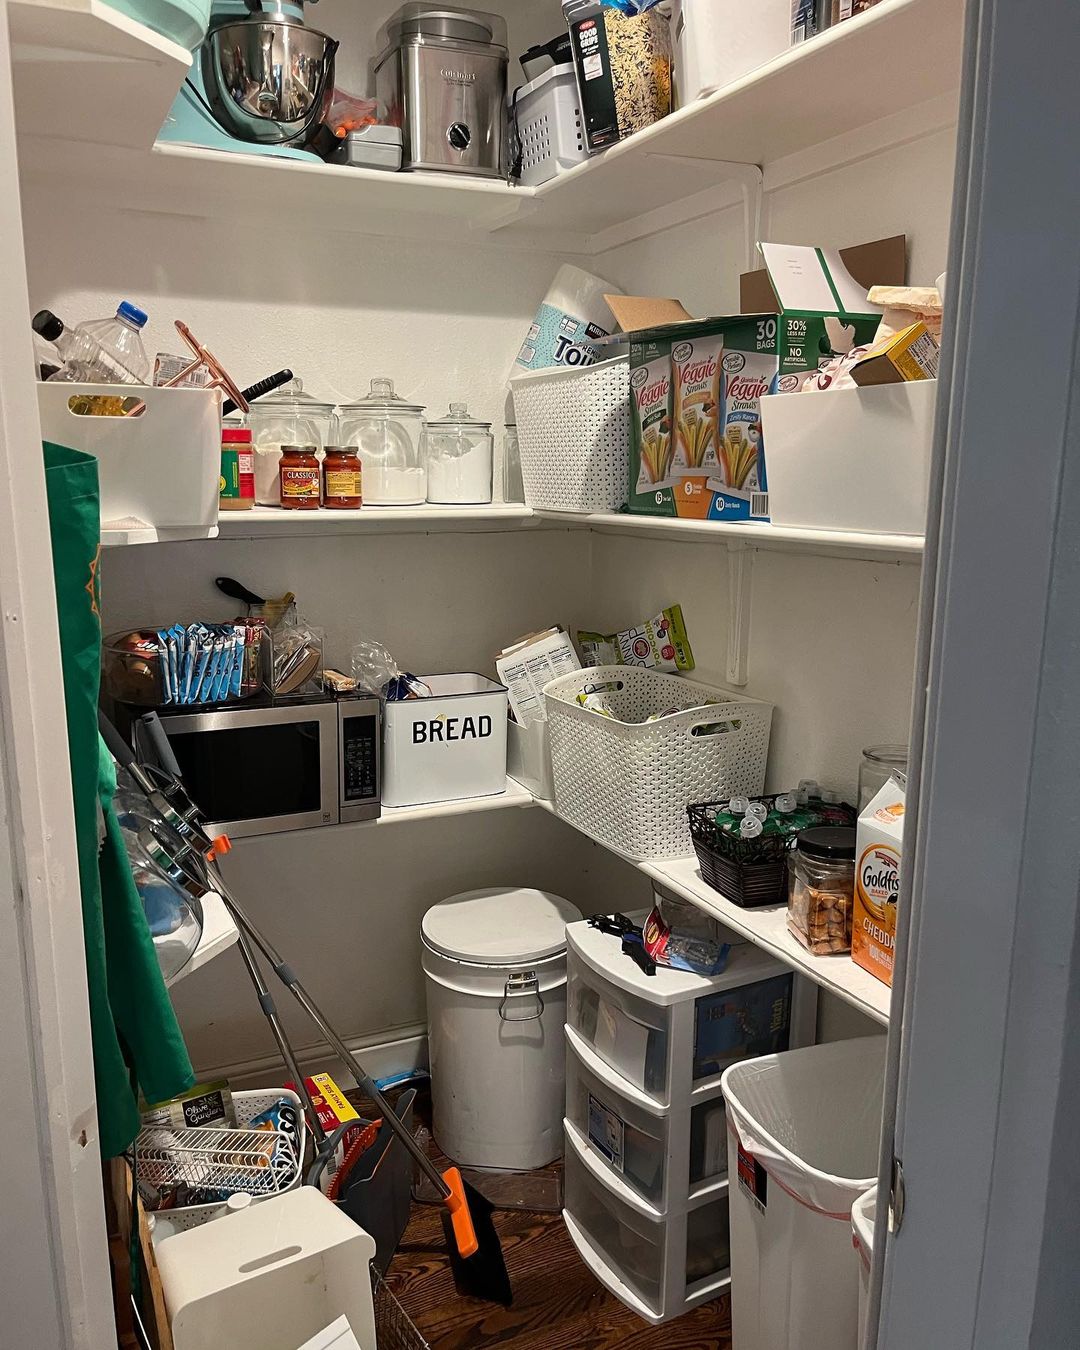 A pantry cluttered with many items in an untidy manner can use more organization tips